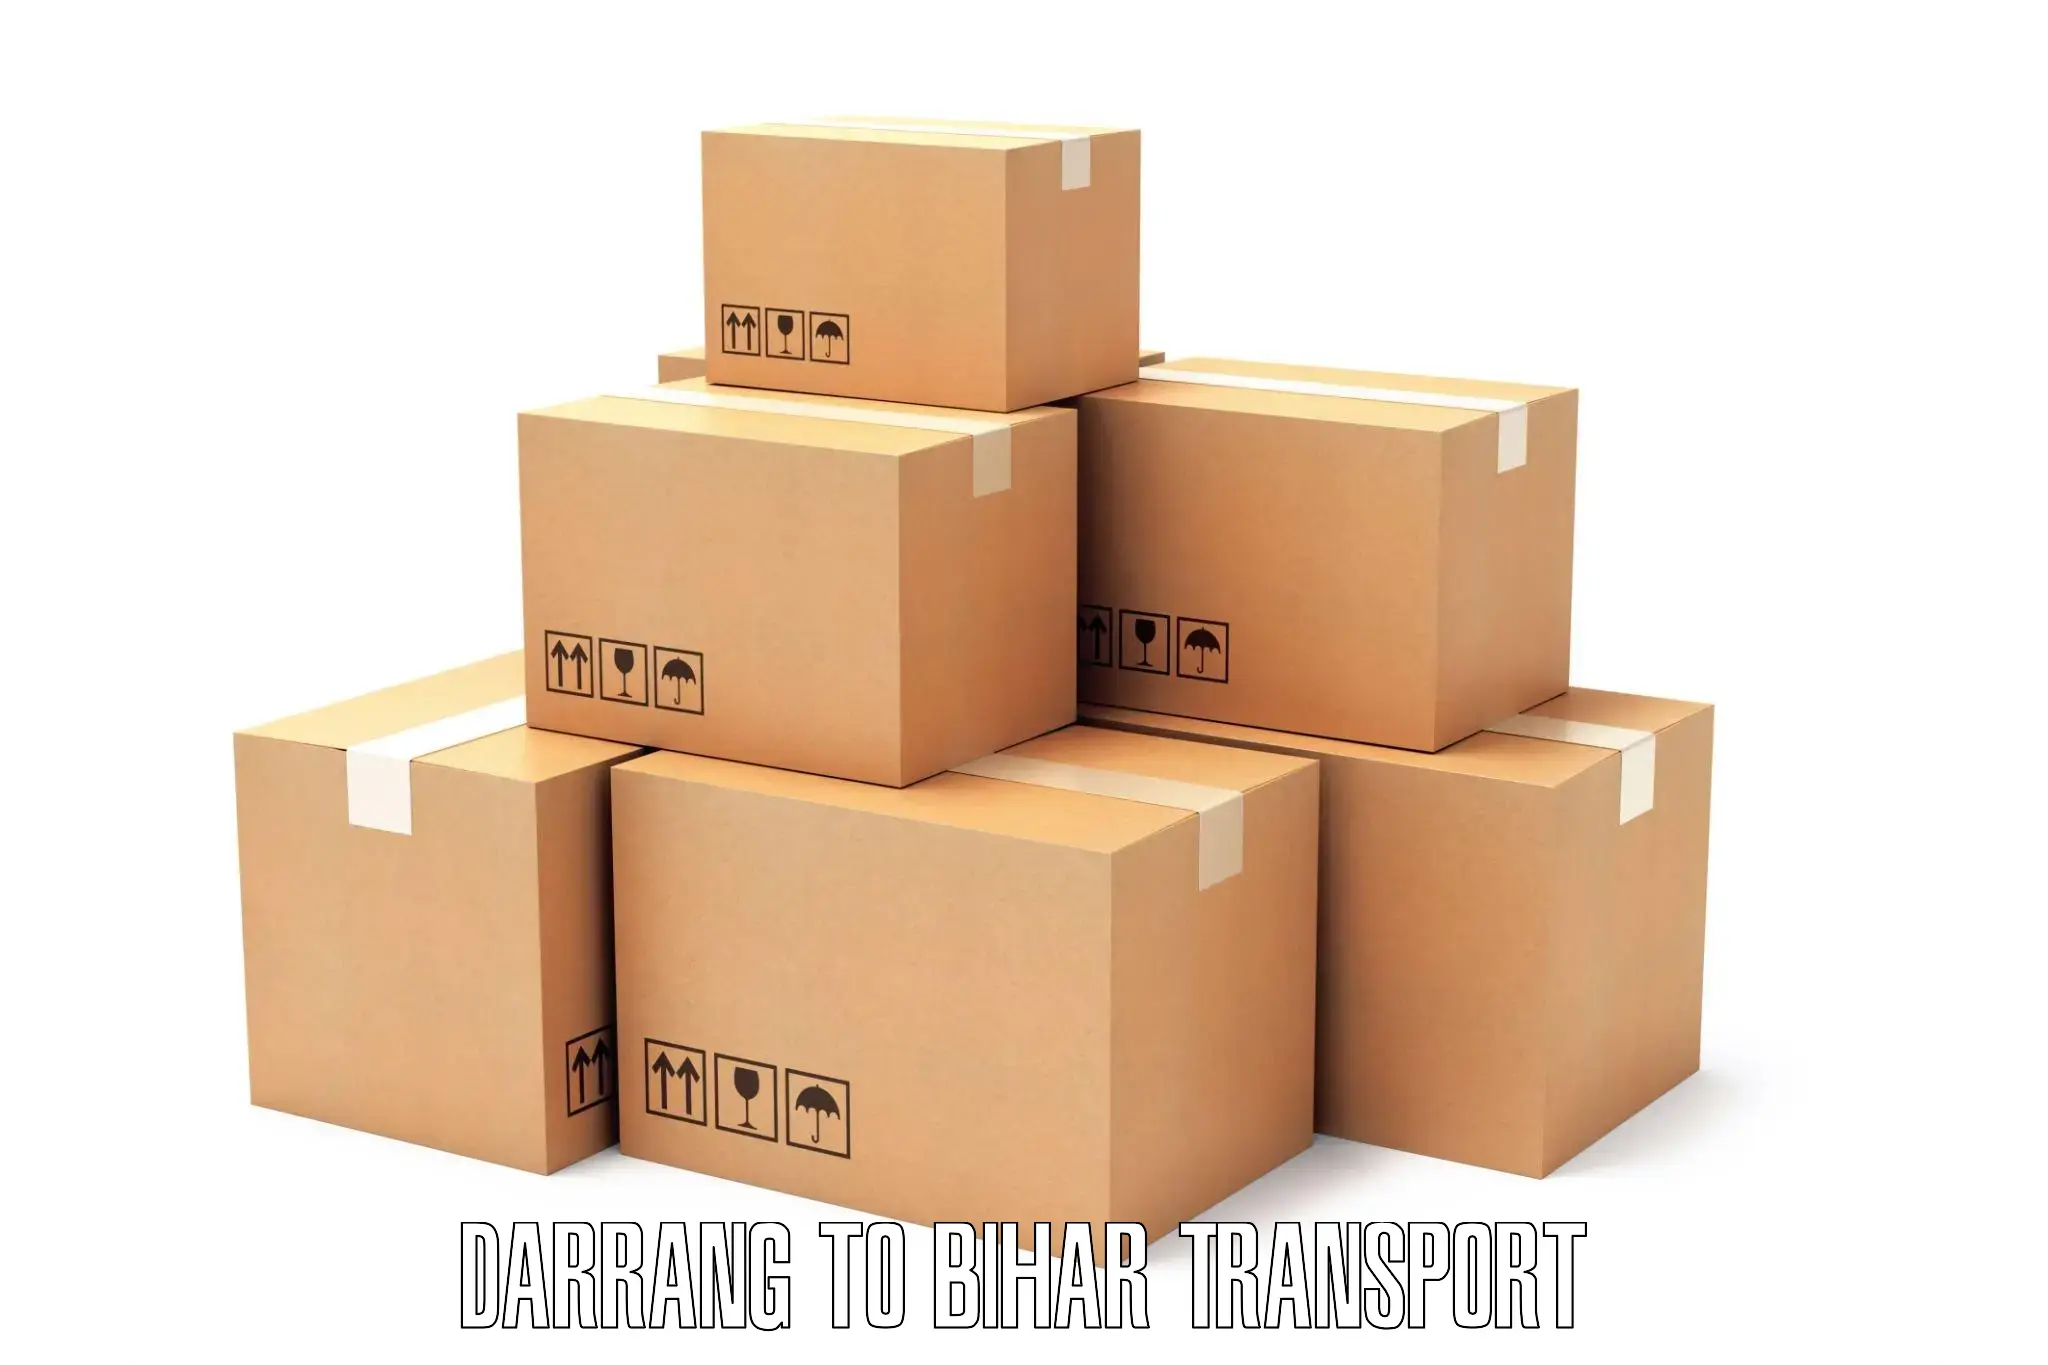 Container transport service Darrang to Bakhri